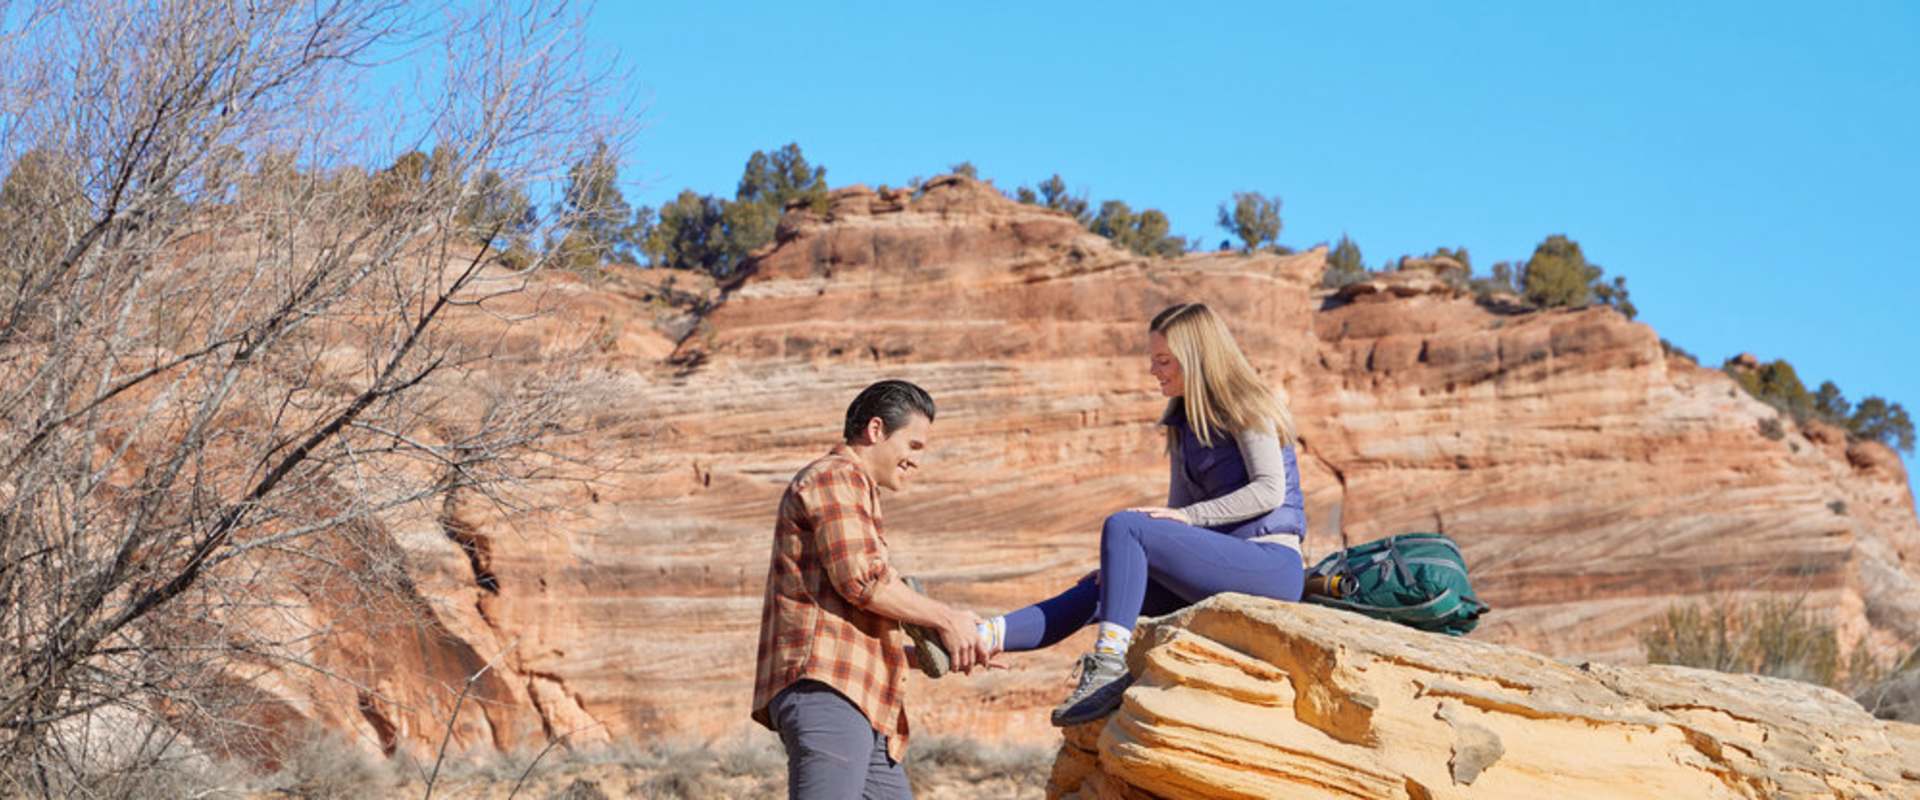 Love in Zion National: A National Park Romance background 2